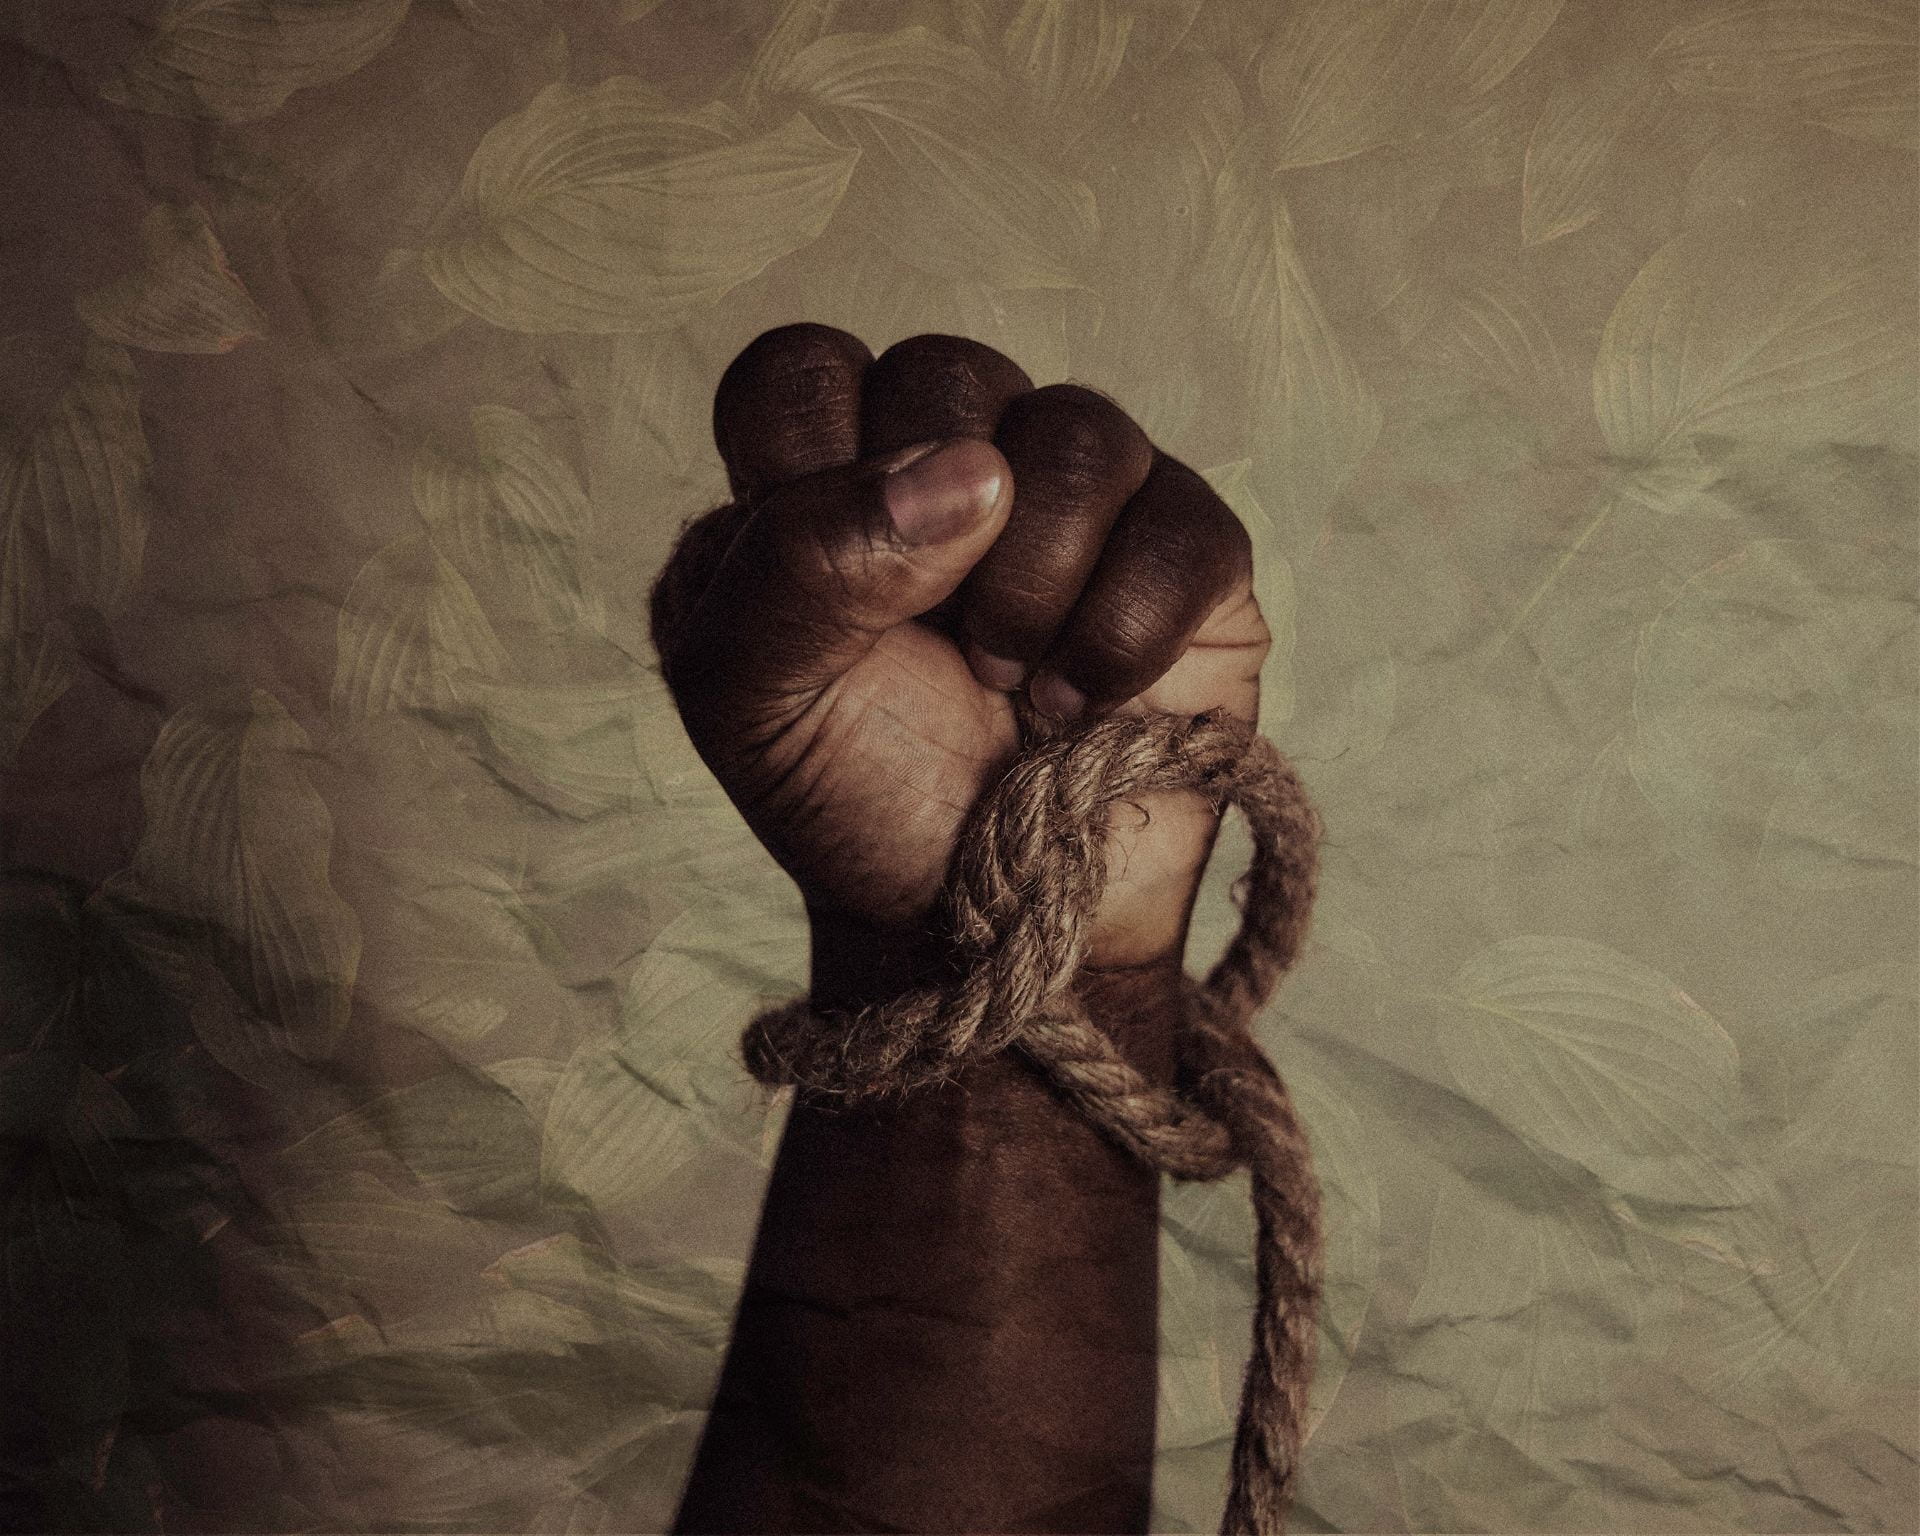 A hand fisted upward with a rope wrapped around the wrist. This is a symbol of Juneteenth, the national celebration of the emancipation of slavery.